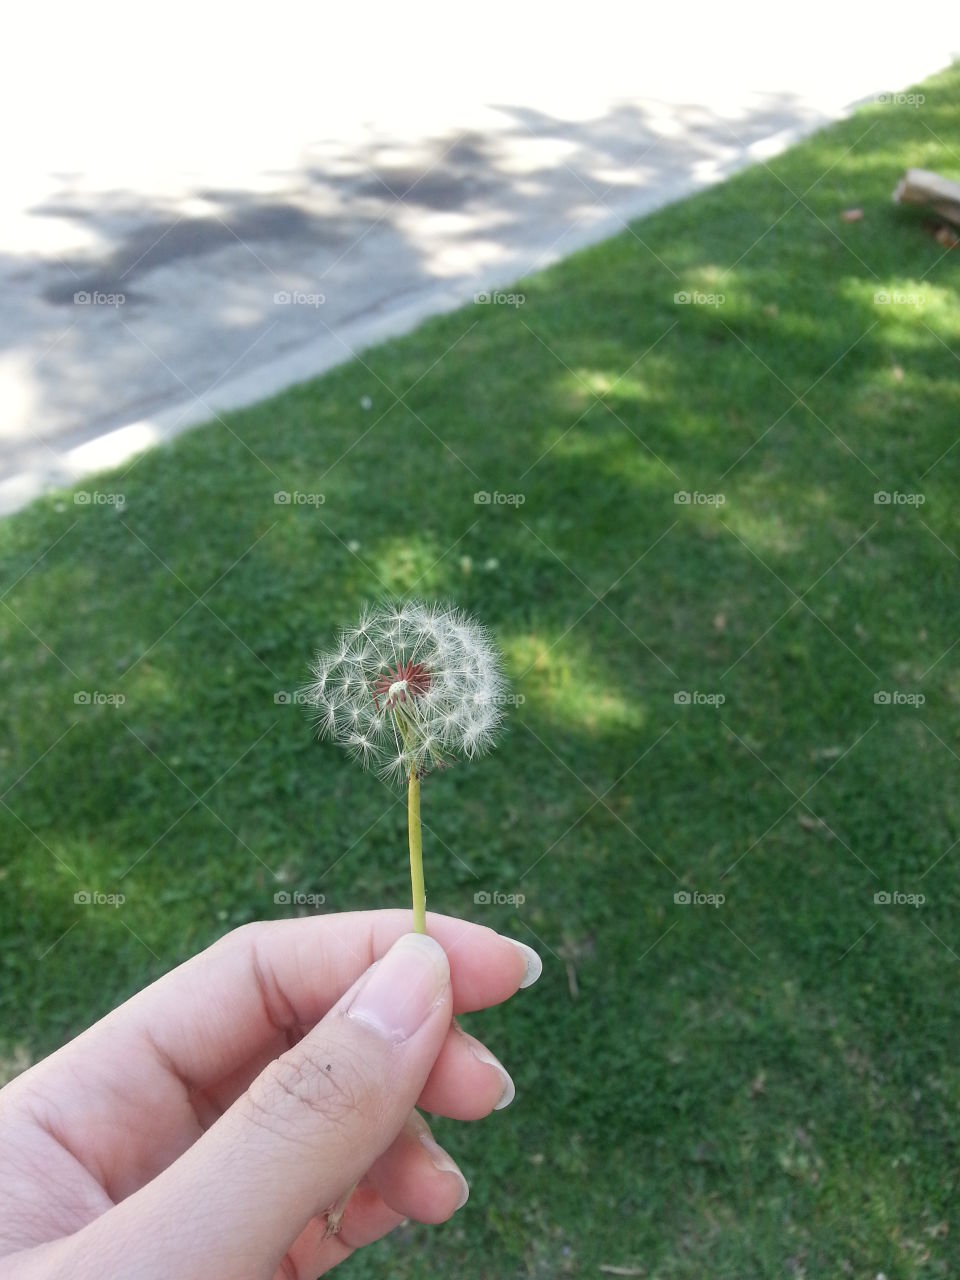 Make A Wish. the day before my birthday, just outside my friend's house i saw this